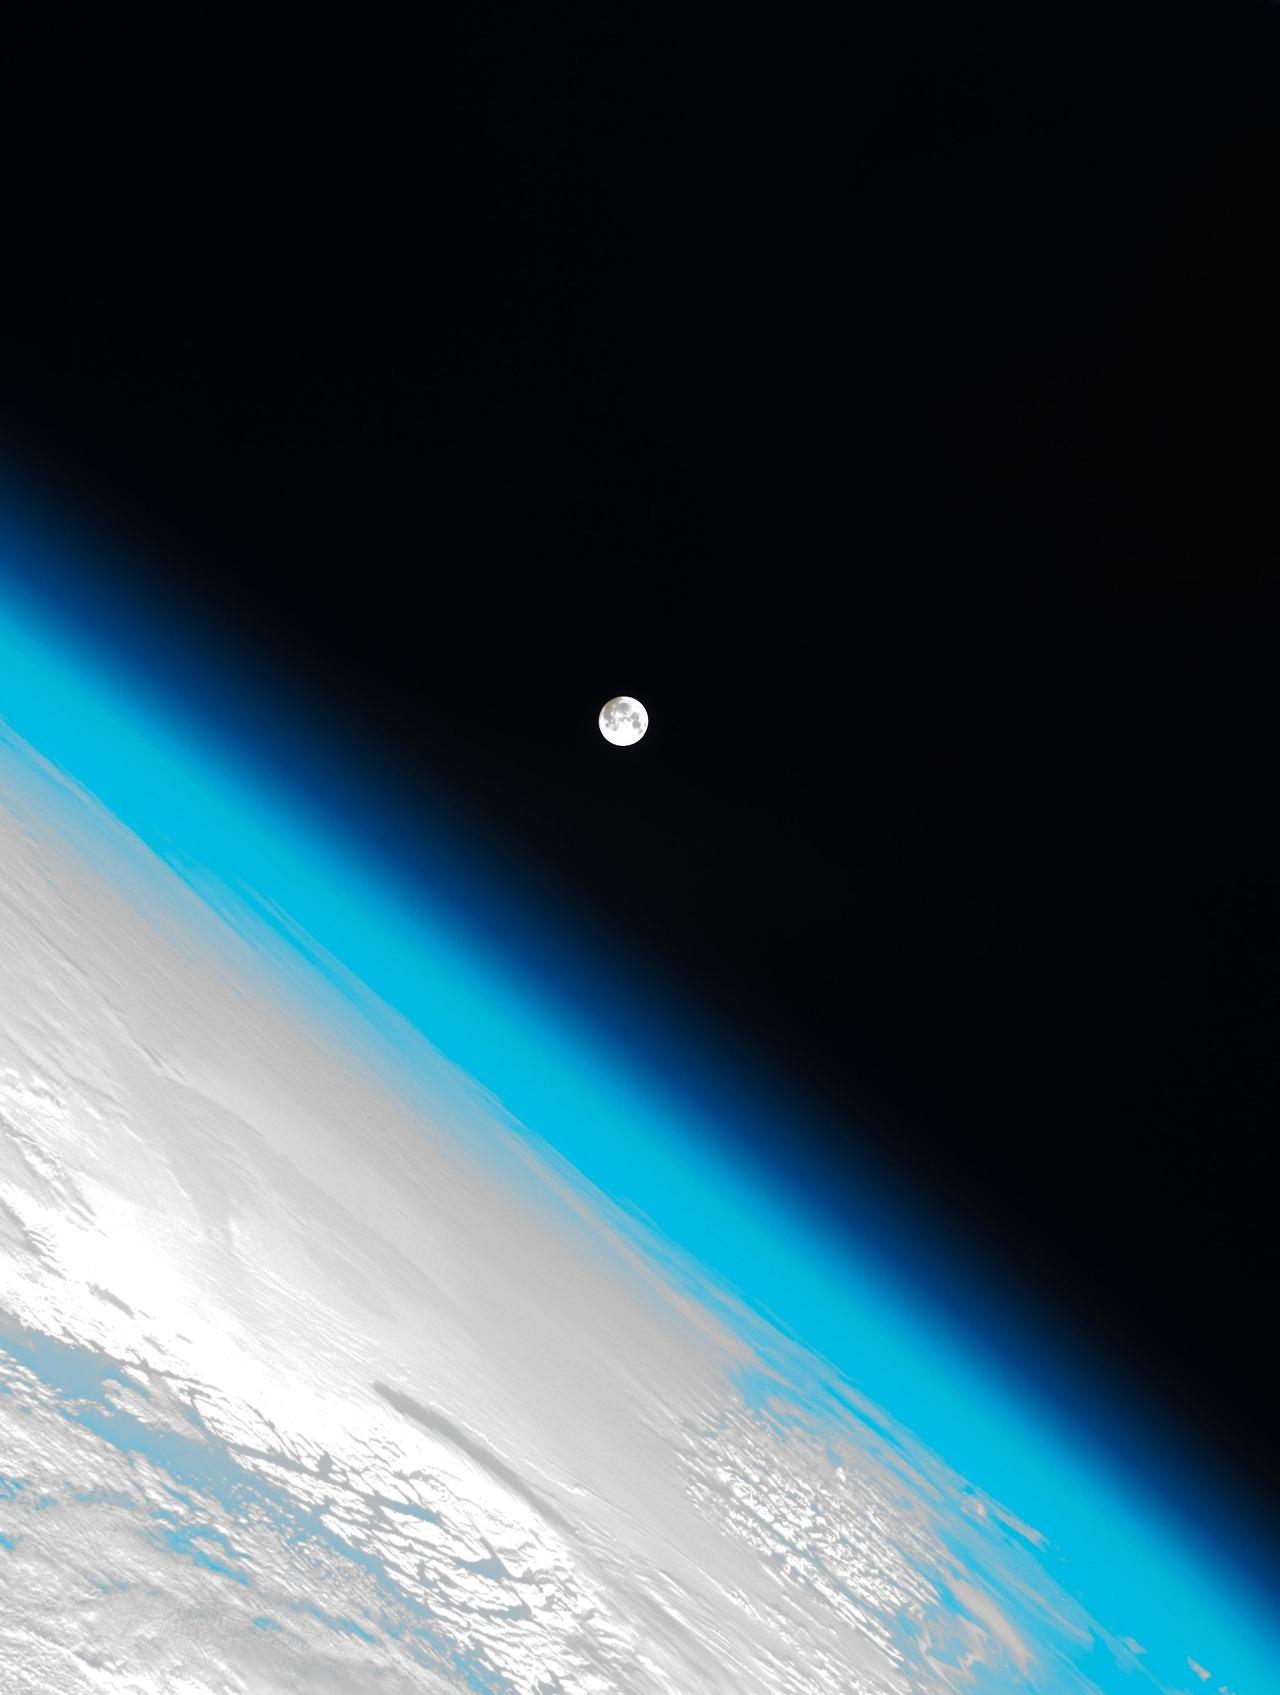 The Moon over the horizon of the Earth from the International Space Station. Flat-earthers will say it's photoshop.